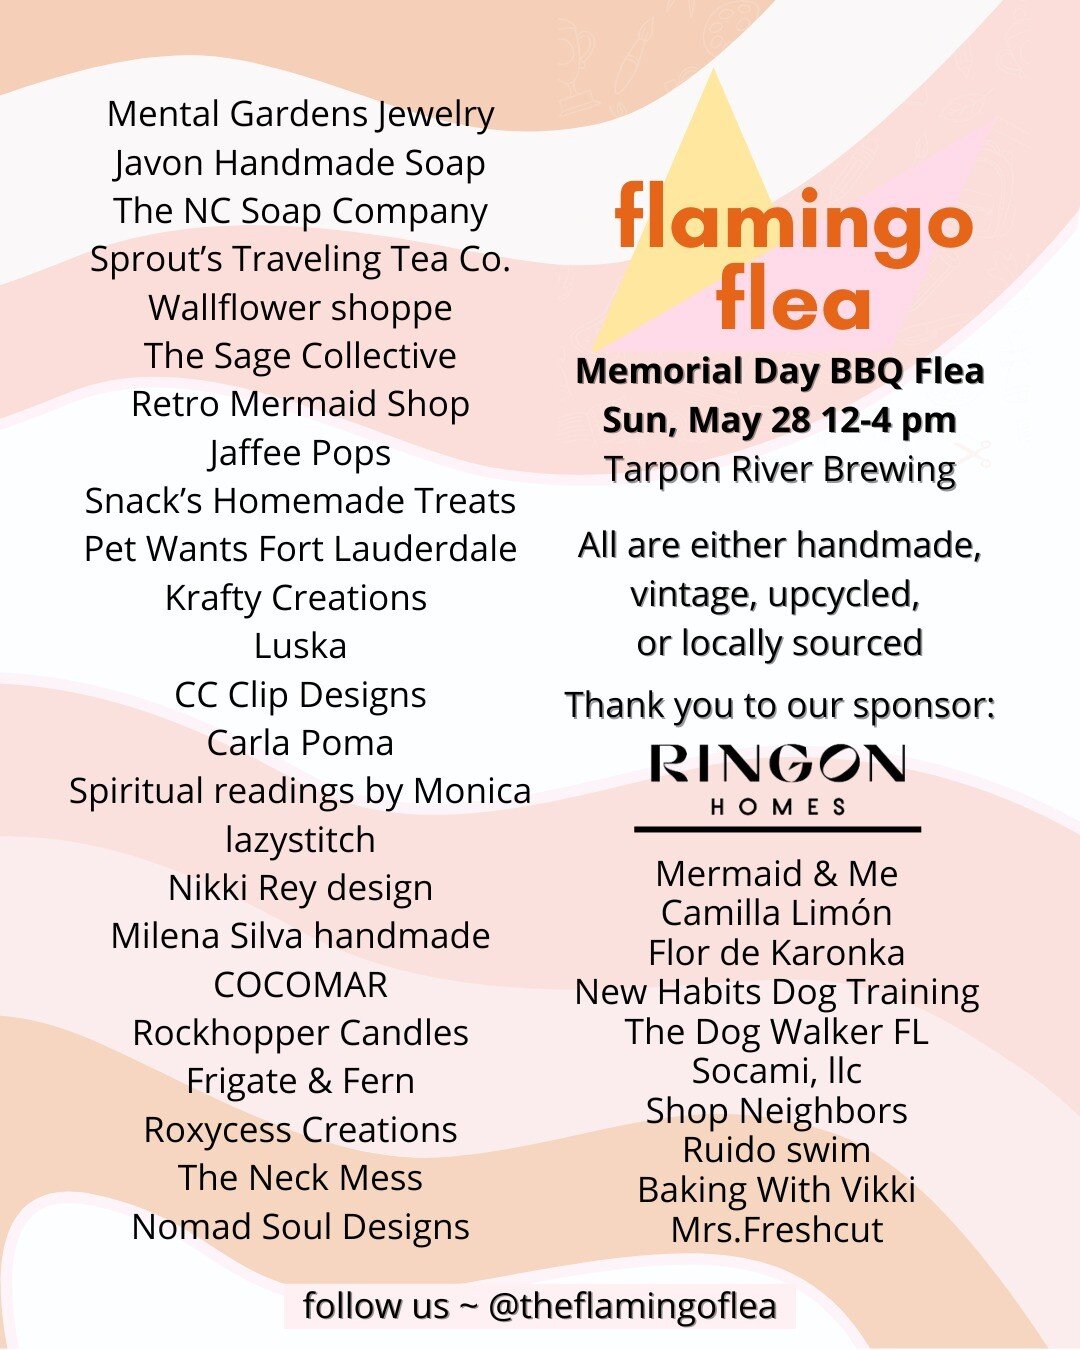 Fresh set for makers, creators, designers, coming your way for our Memorial Day Weekend BBQ Flea! 

Hang with us and our new friends @ringonhomes Sunday, May 28th 12 - 4 PM for some good neighborhood vibes! 

Click the link in the bio to add us to yo